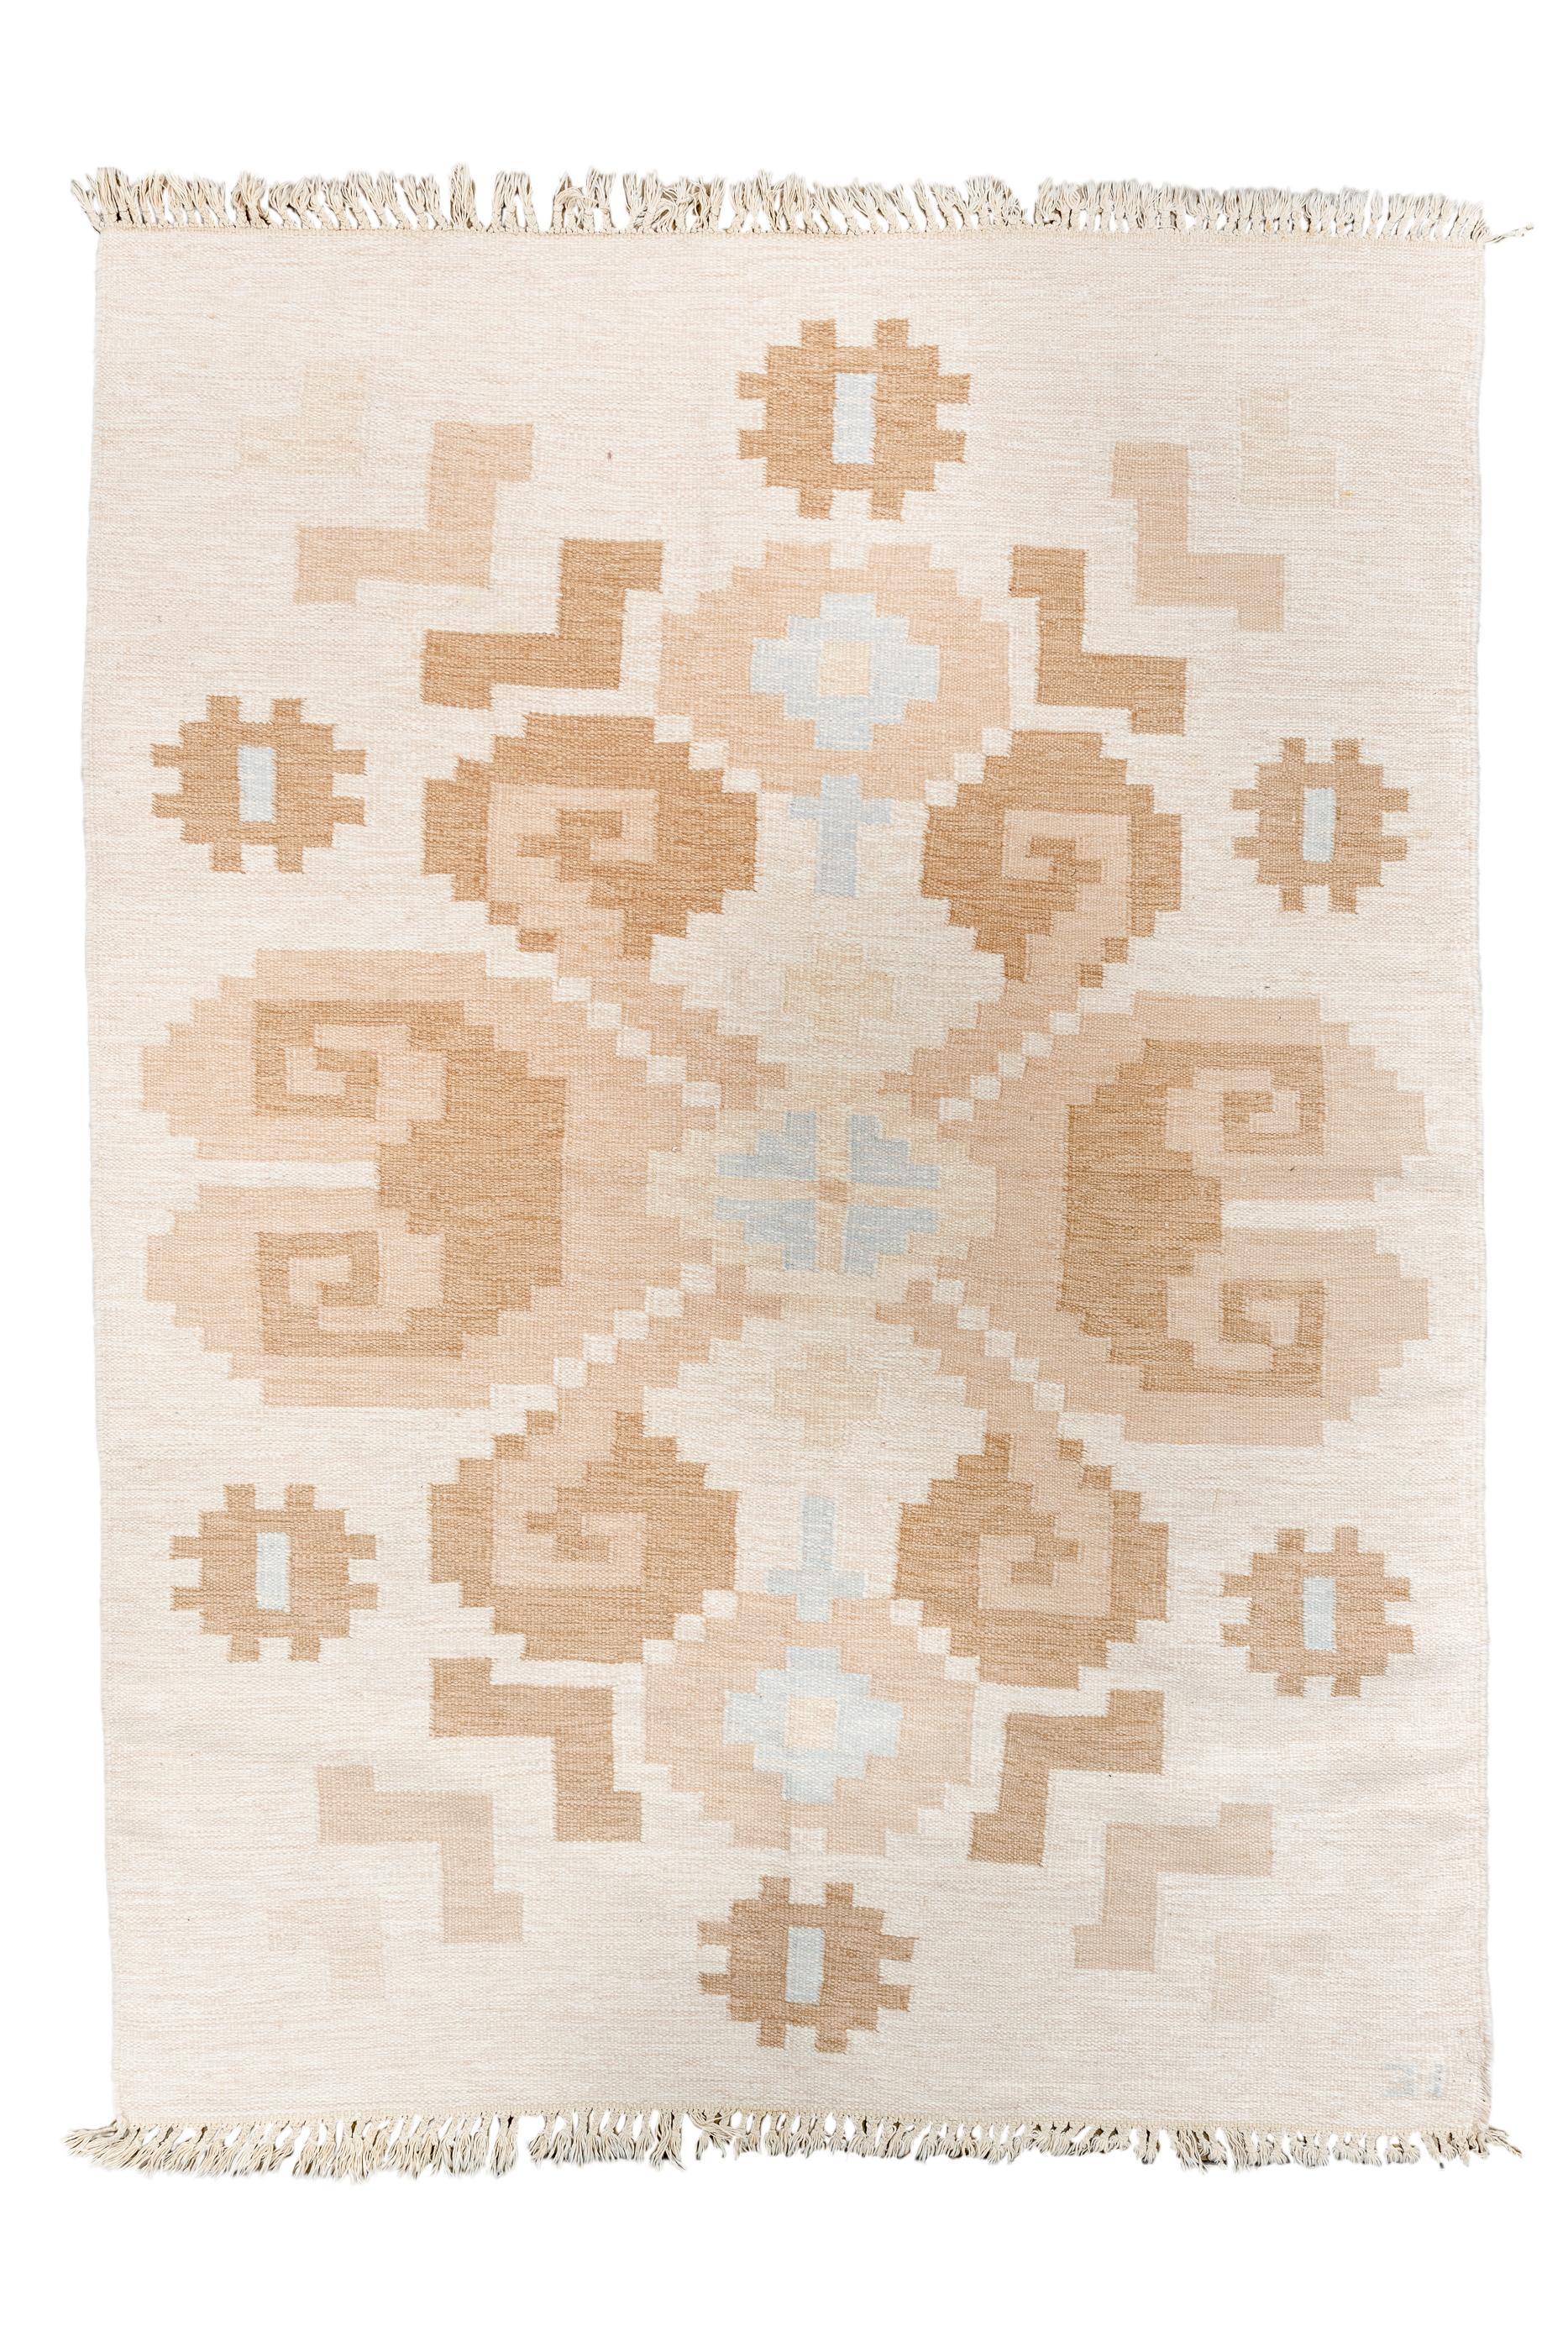 The borderless, cream field shows a charmingly unbalanced central motif of stepped curled leaf style elements, abstract depicting V-shaped flowers, with secondary cross-hatch elements.   The weavers started at the left and as they proceeded, they